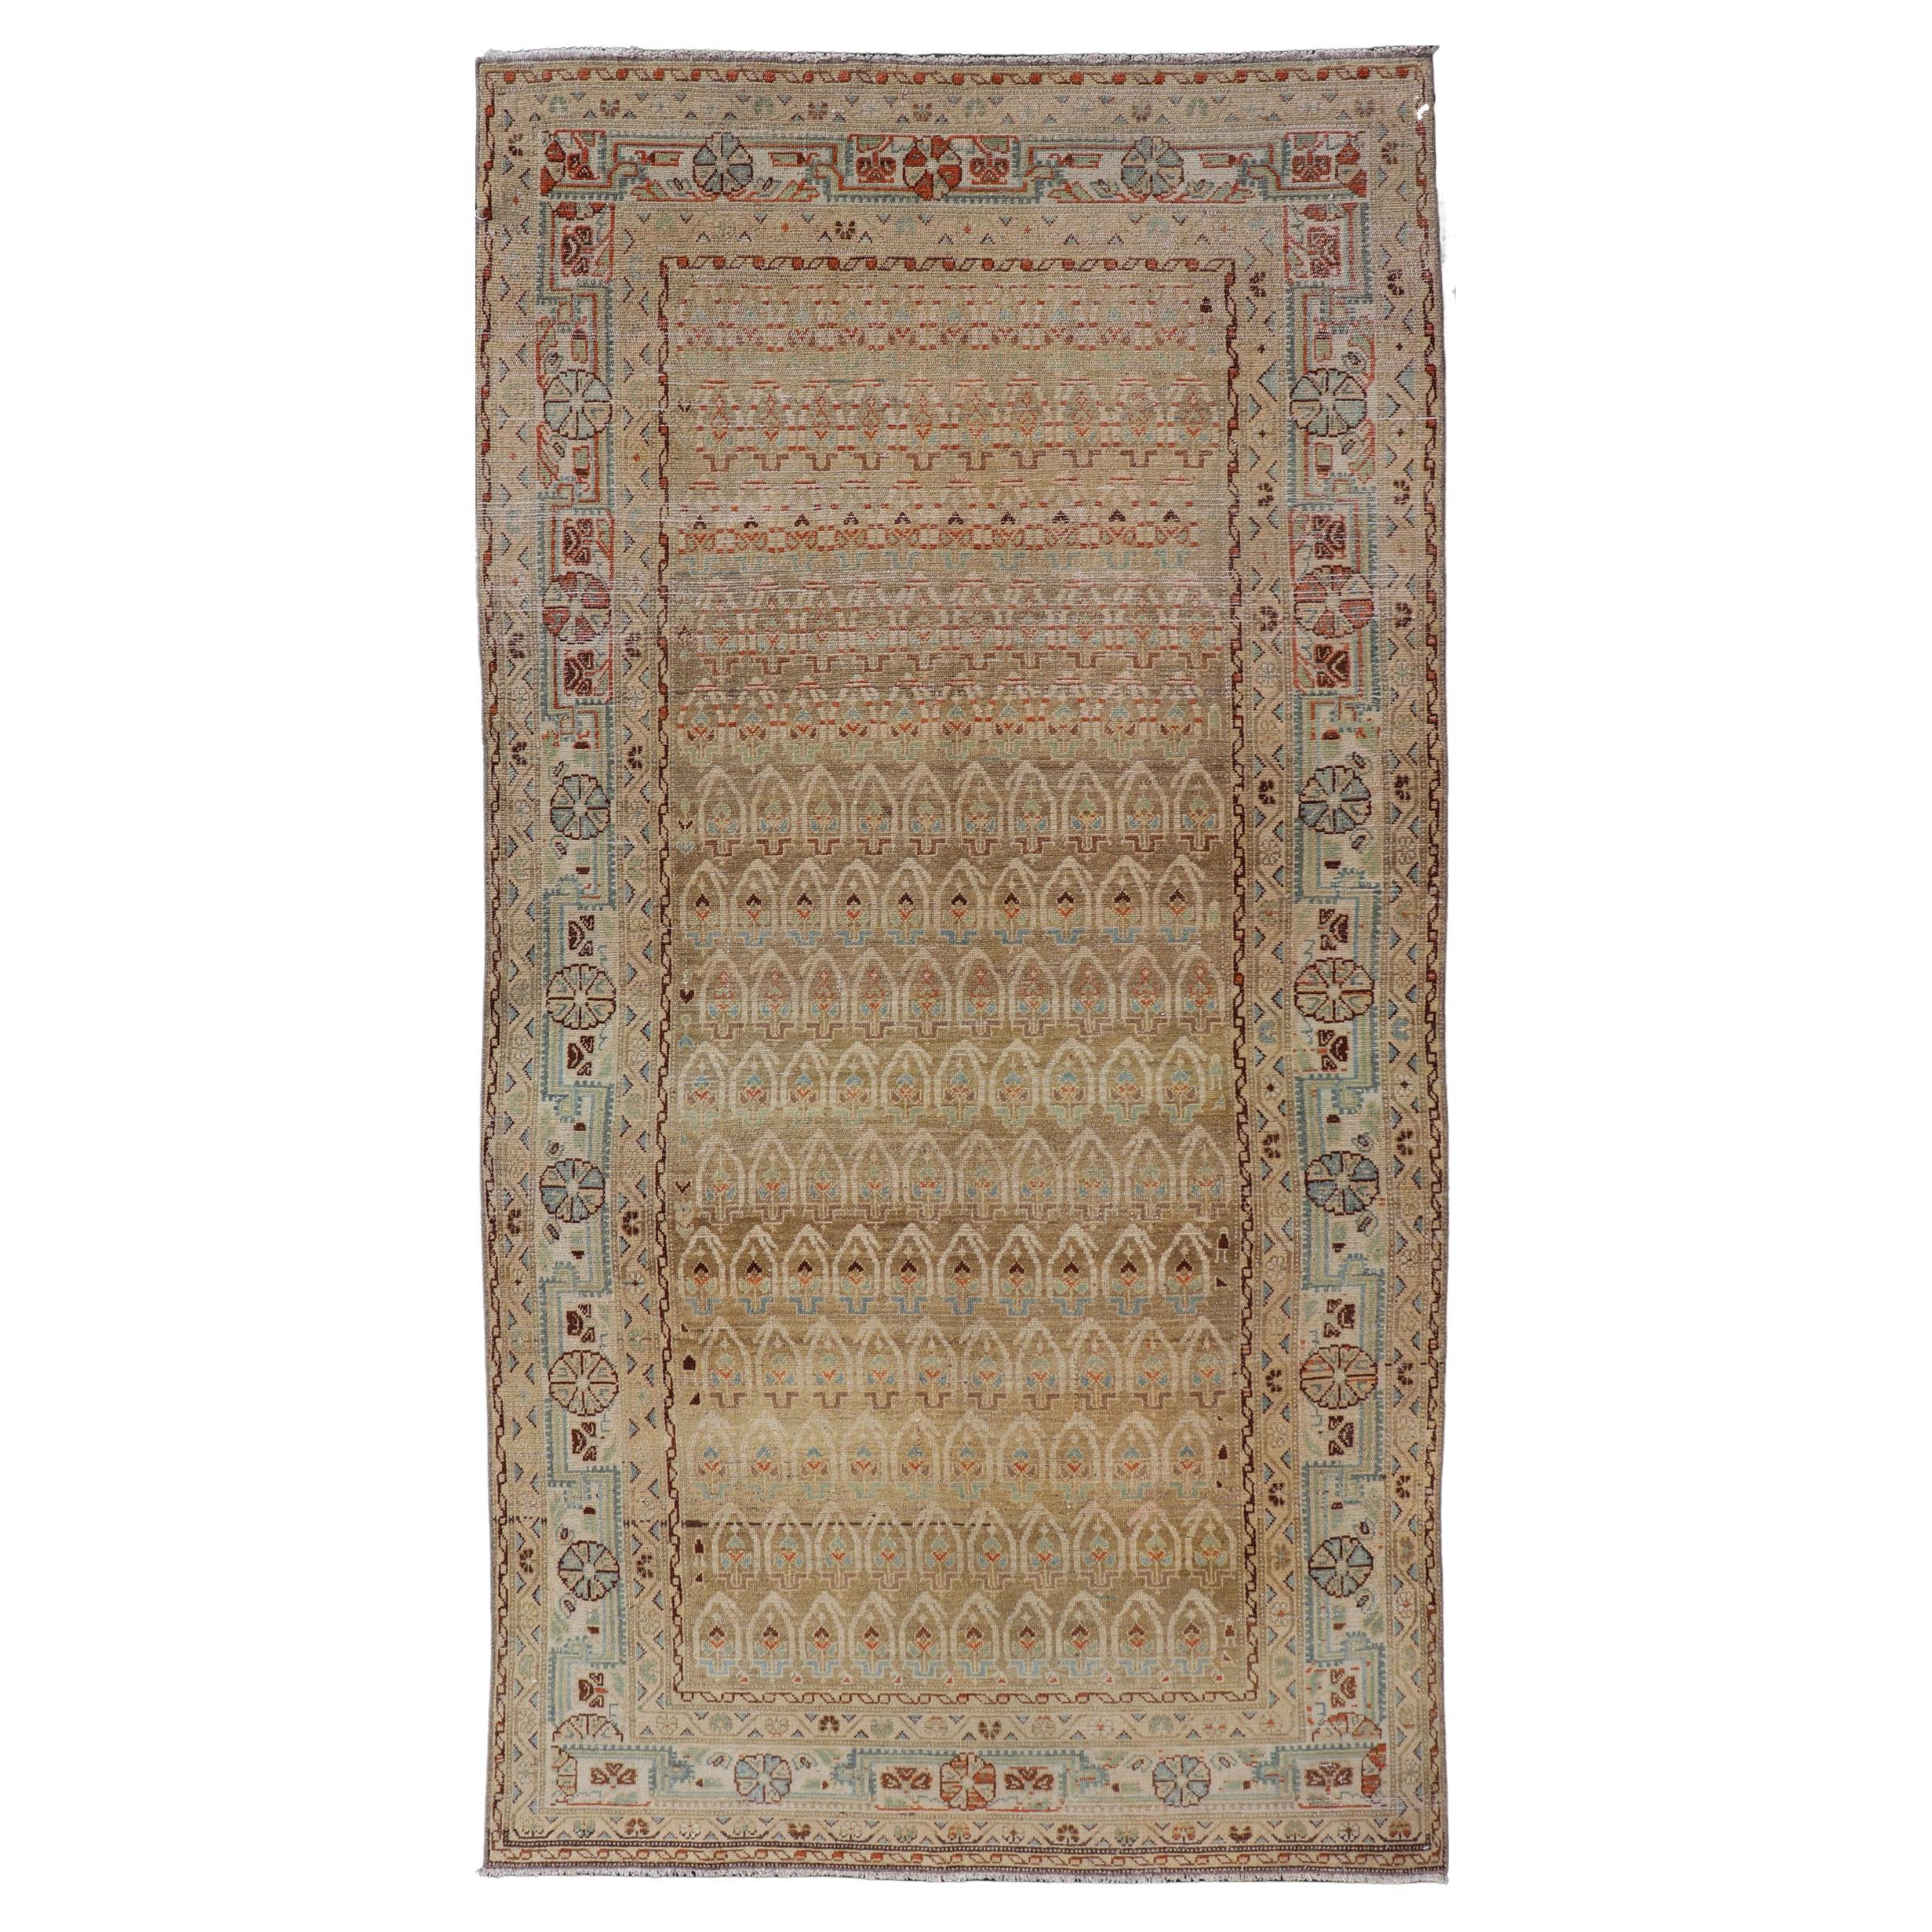 Antique Hamadan Gallery Rug in Wool with All-Over Sub-Geometric Paisley Design